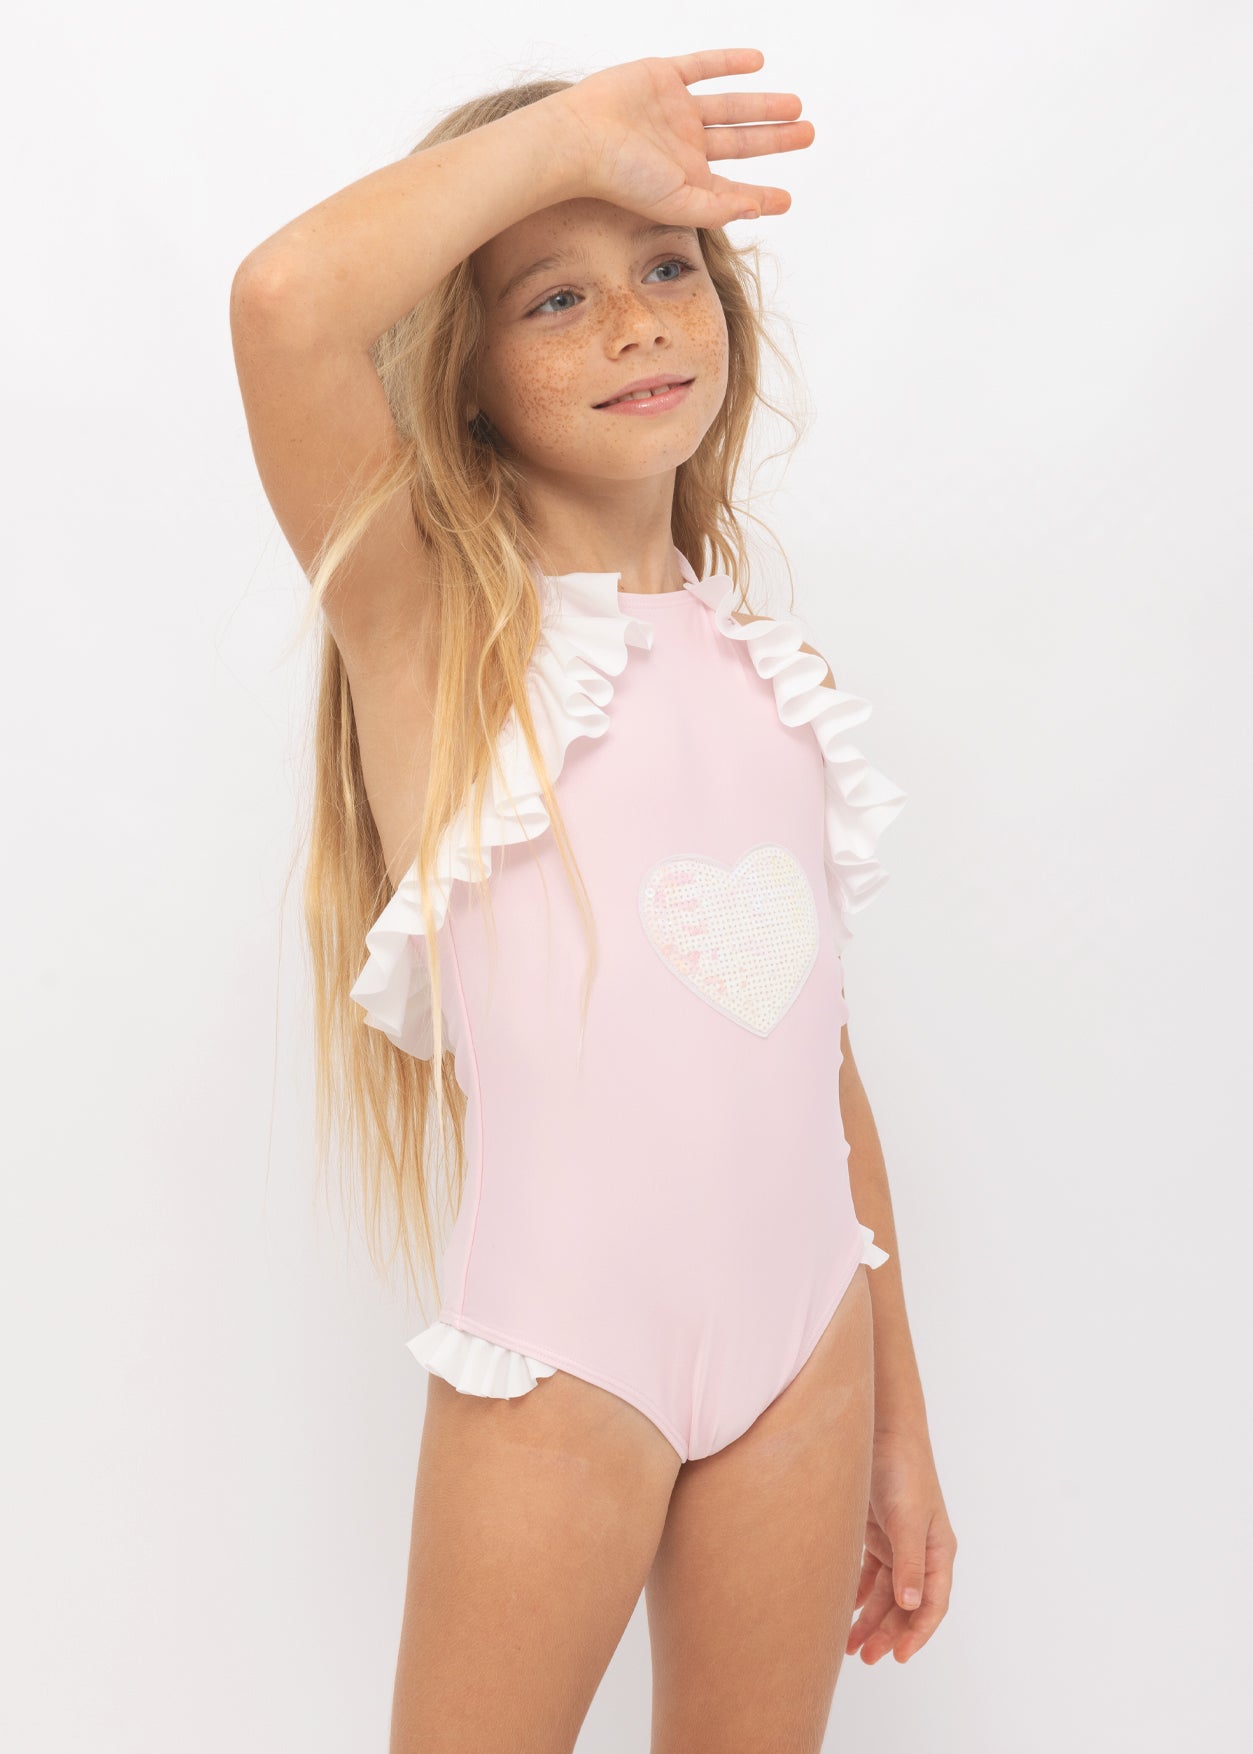 pink swimsuit for girls, pink bathing suit for tween girls, pink bathing costume for girls